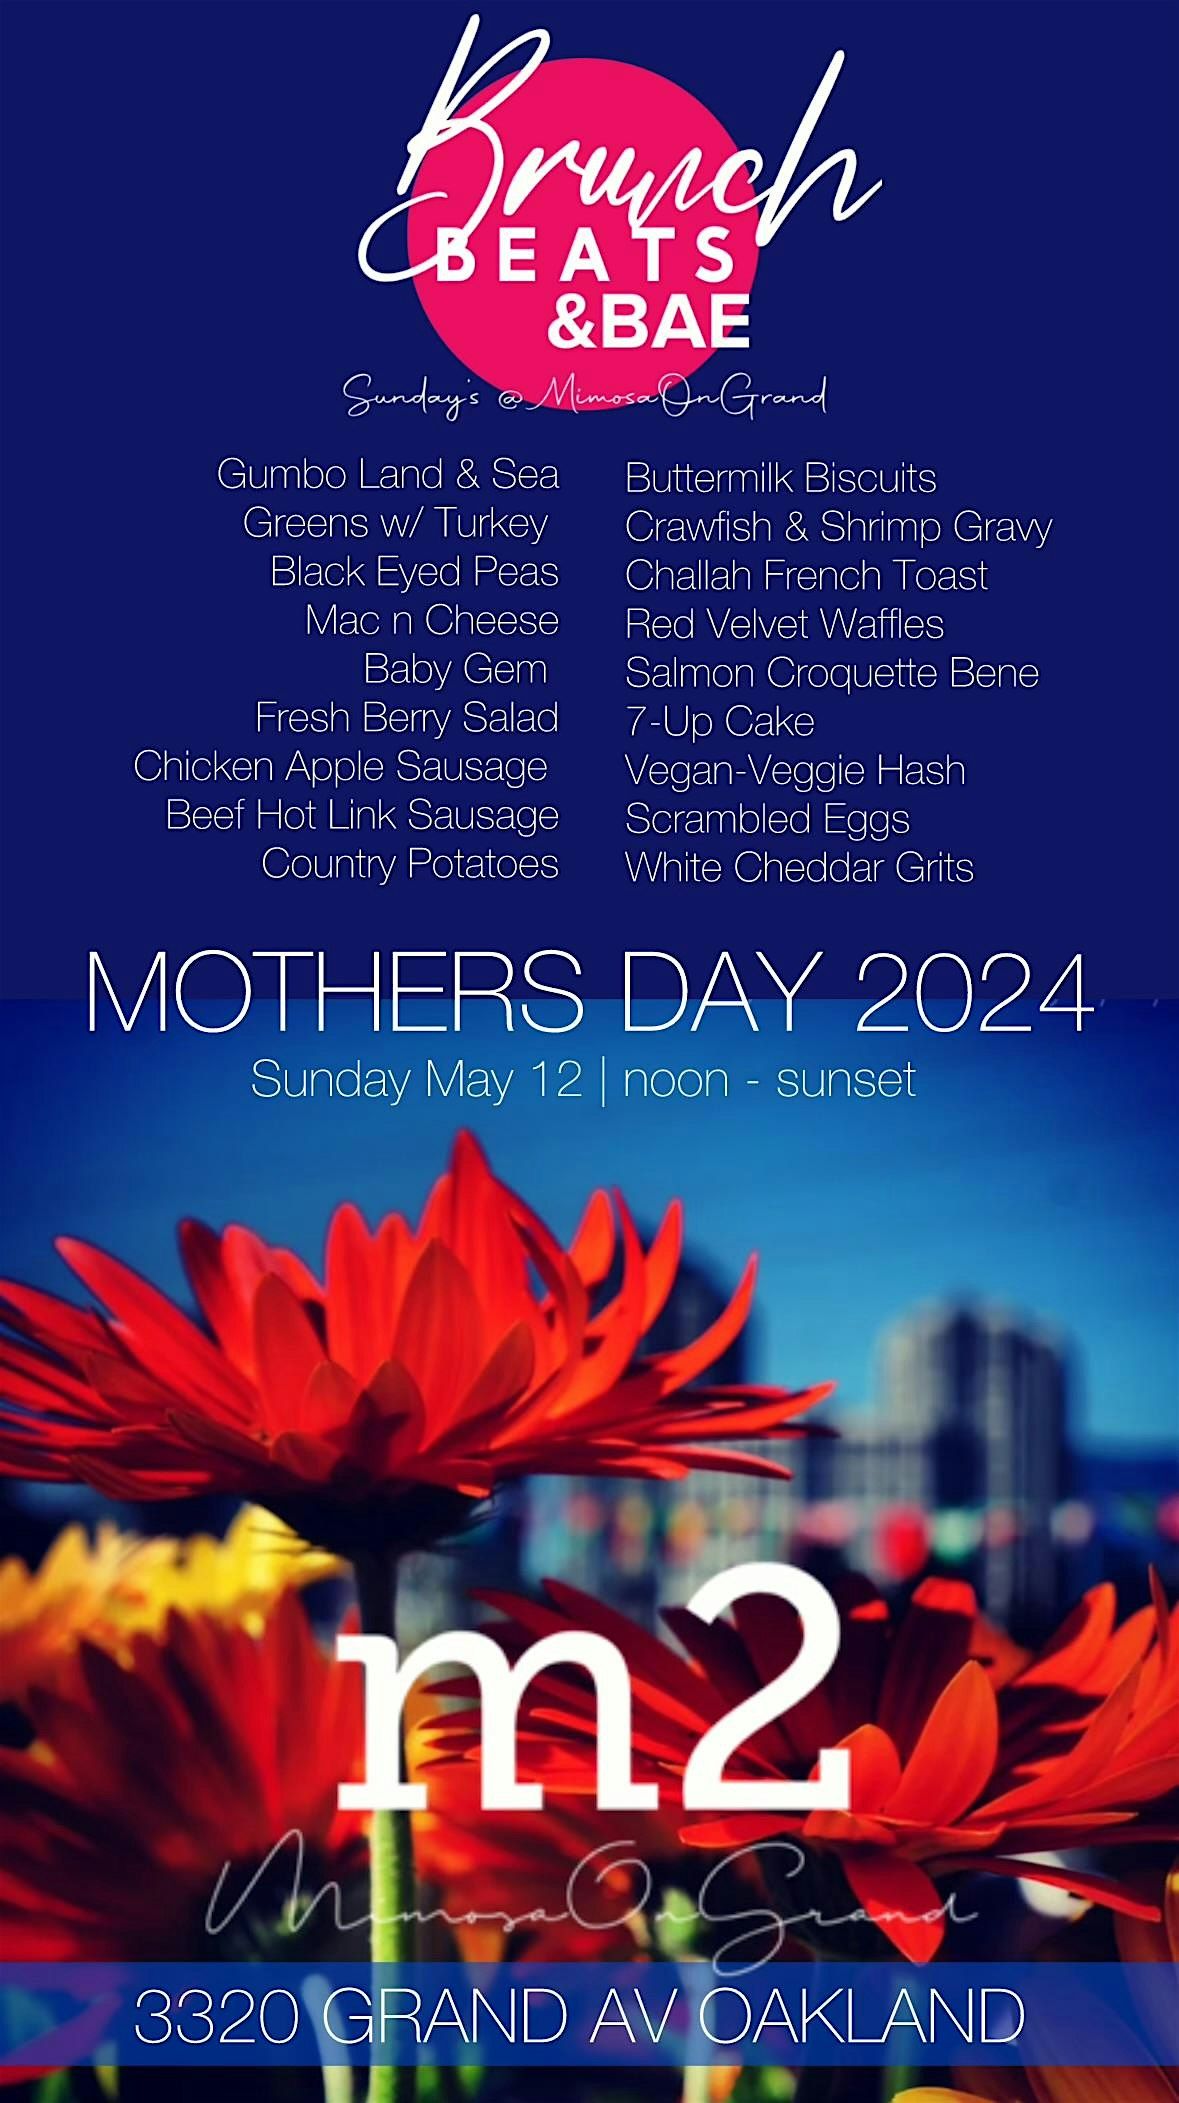 MOTHERS DAY 2024 @m2